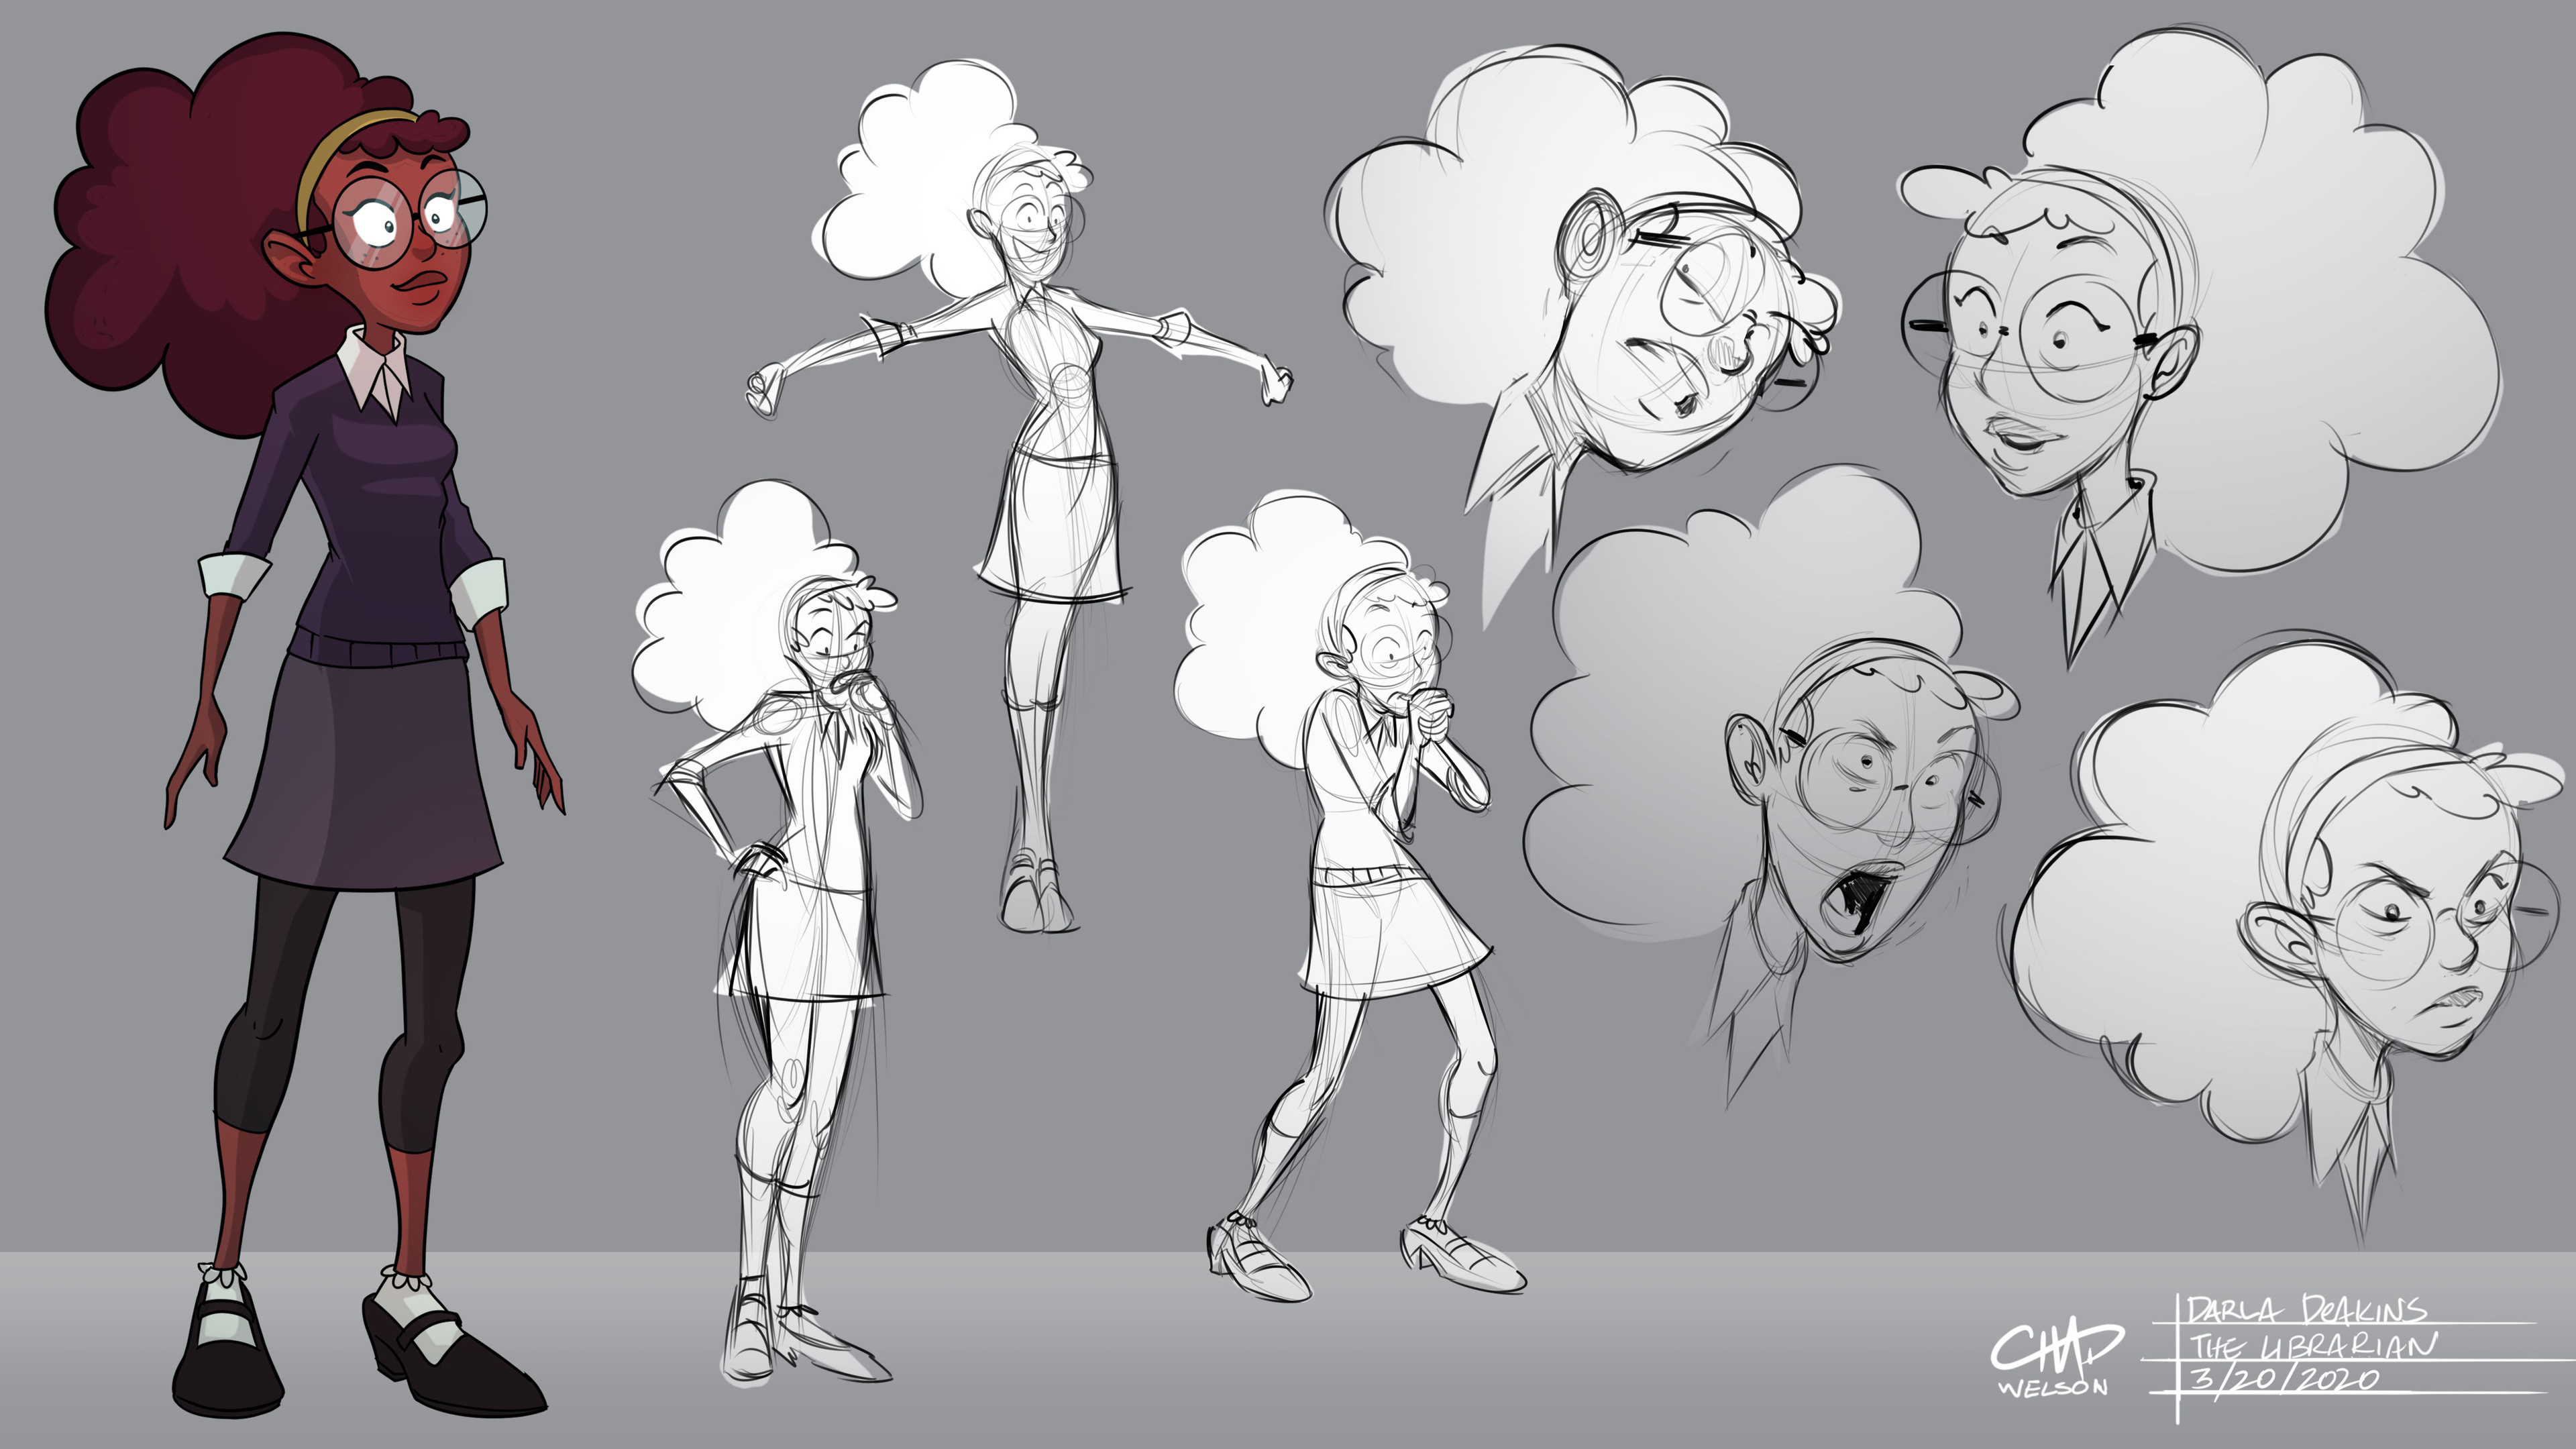 Darla Deakins, final design and expressions 